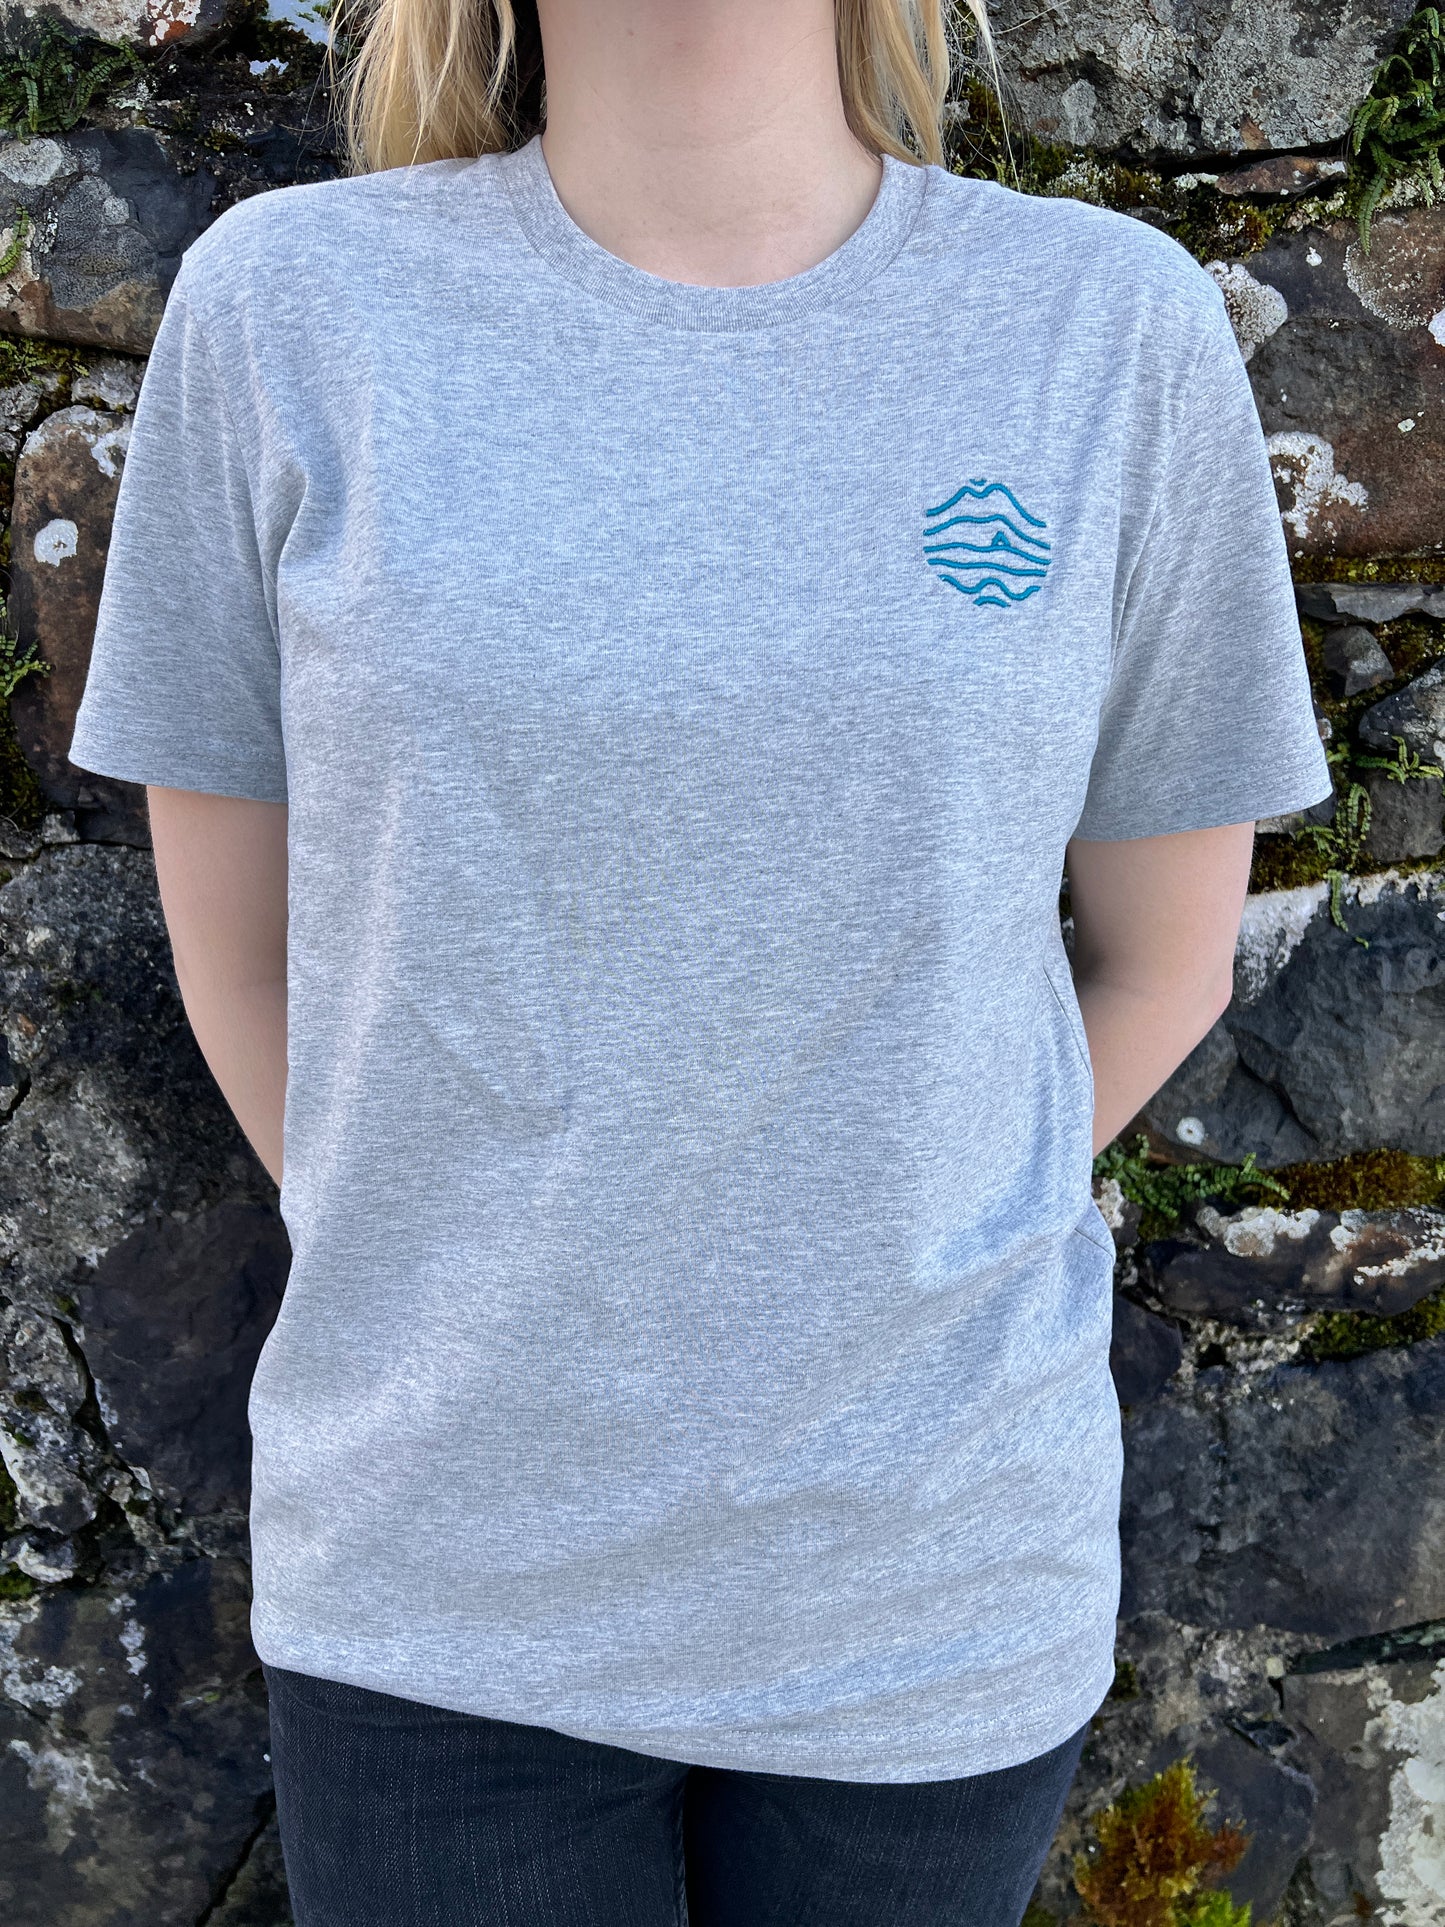 Mull and Iona Embroidered T-shirt